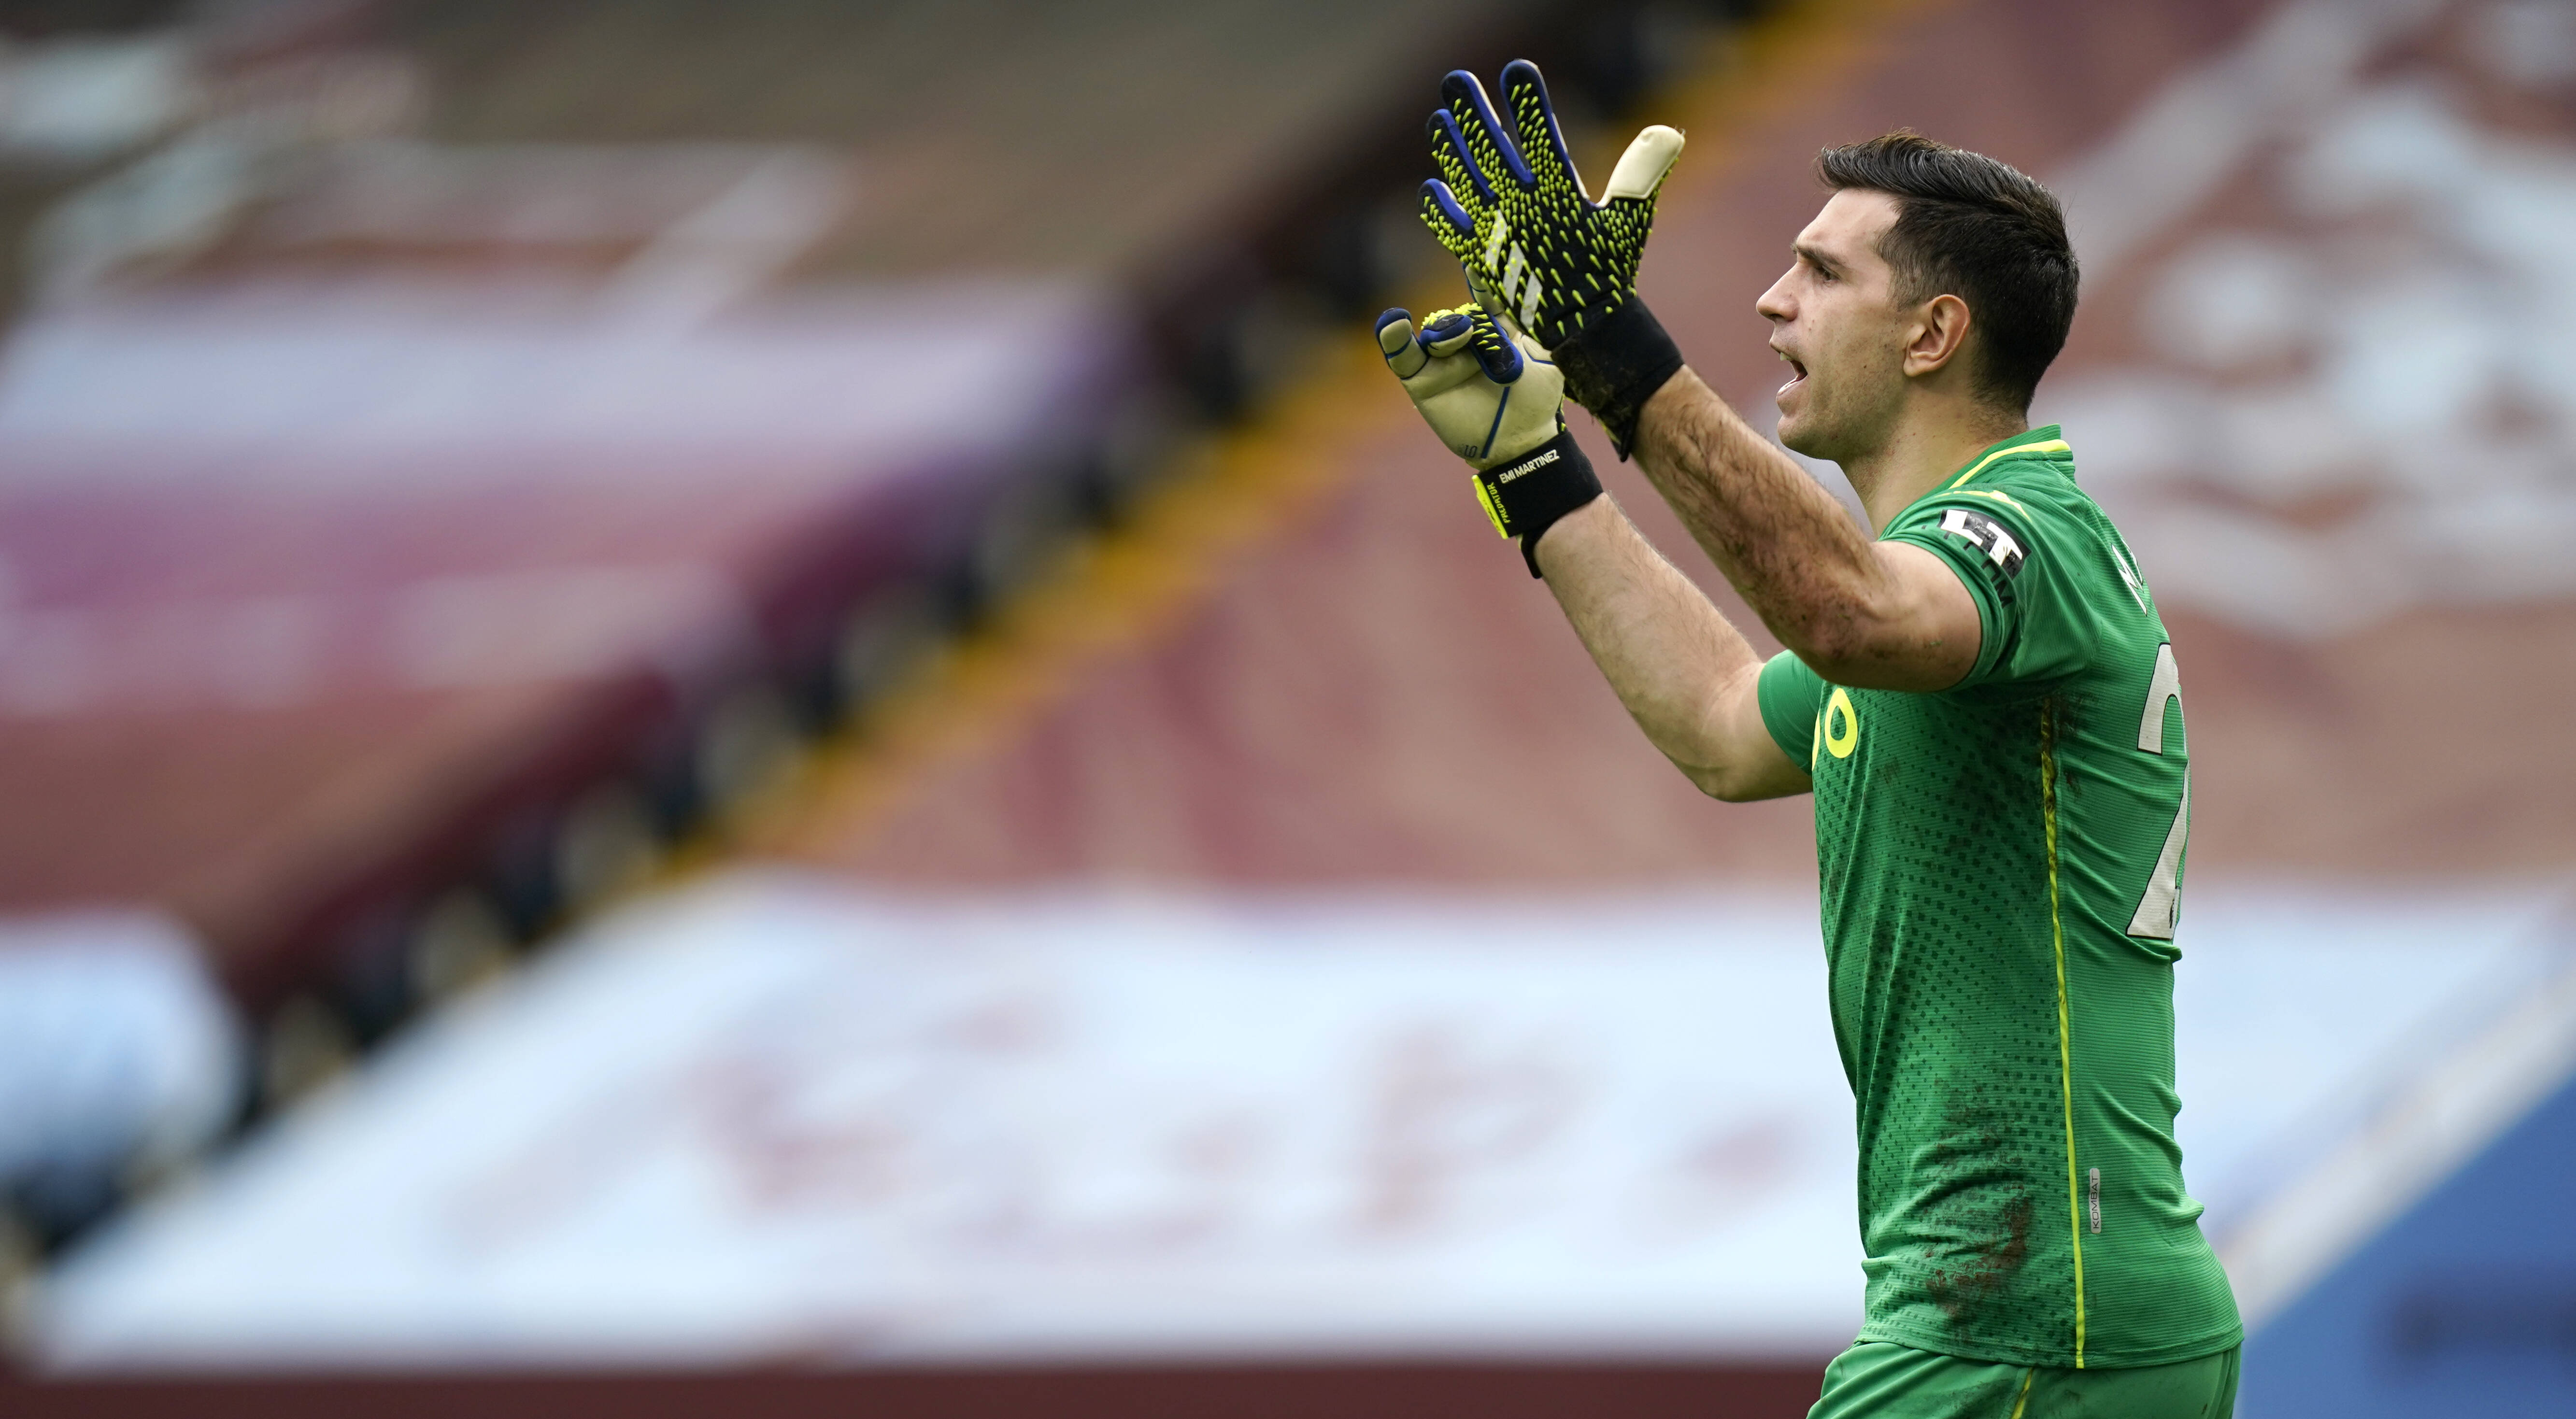 We are here to win it' - Aston Villa goalkeeper Emiliano Martínez discusses  finally winning an international trophy in the Lionel Messi era